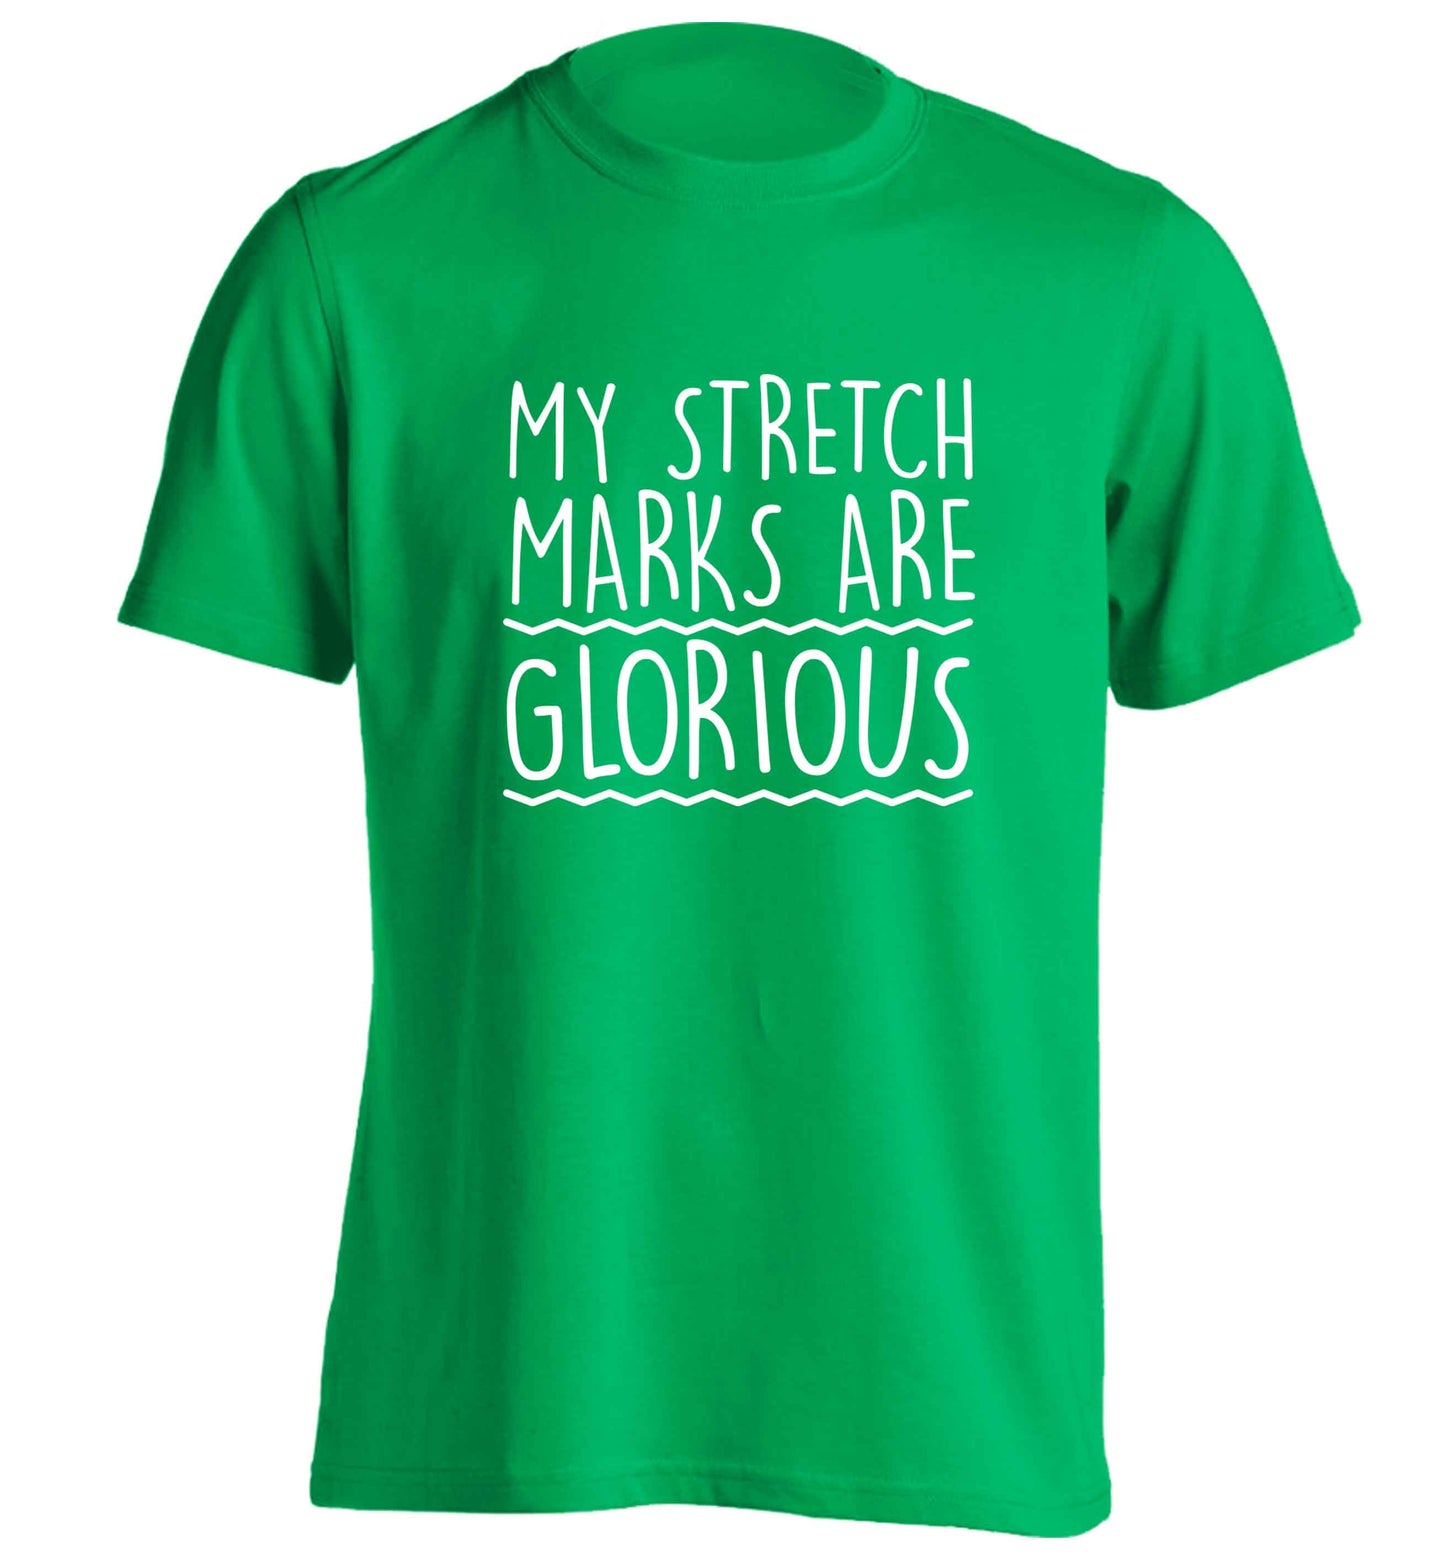 My stretch marks are glorious adults unisex green Tshirt 2XL